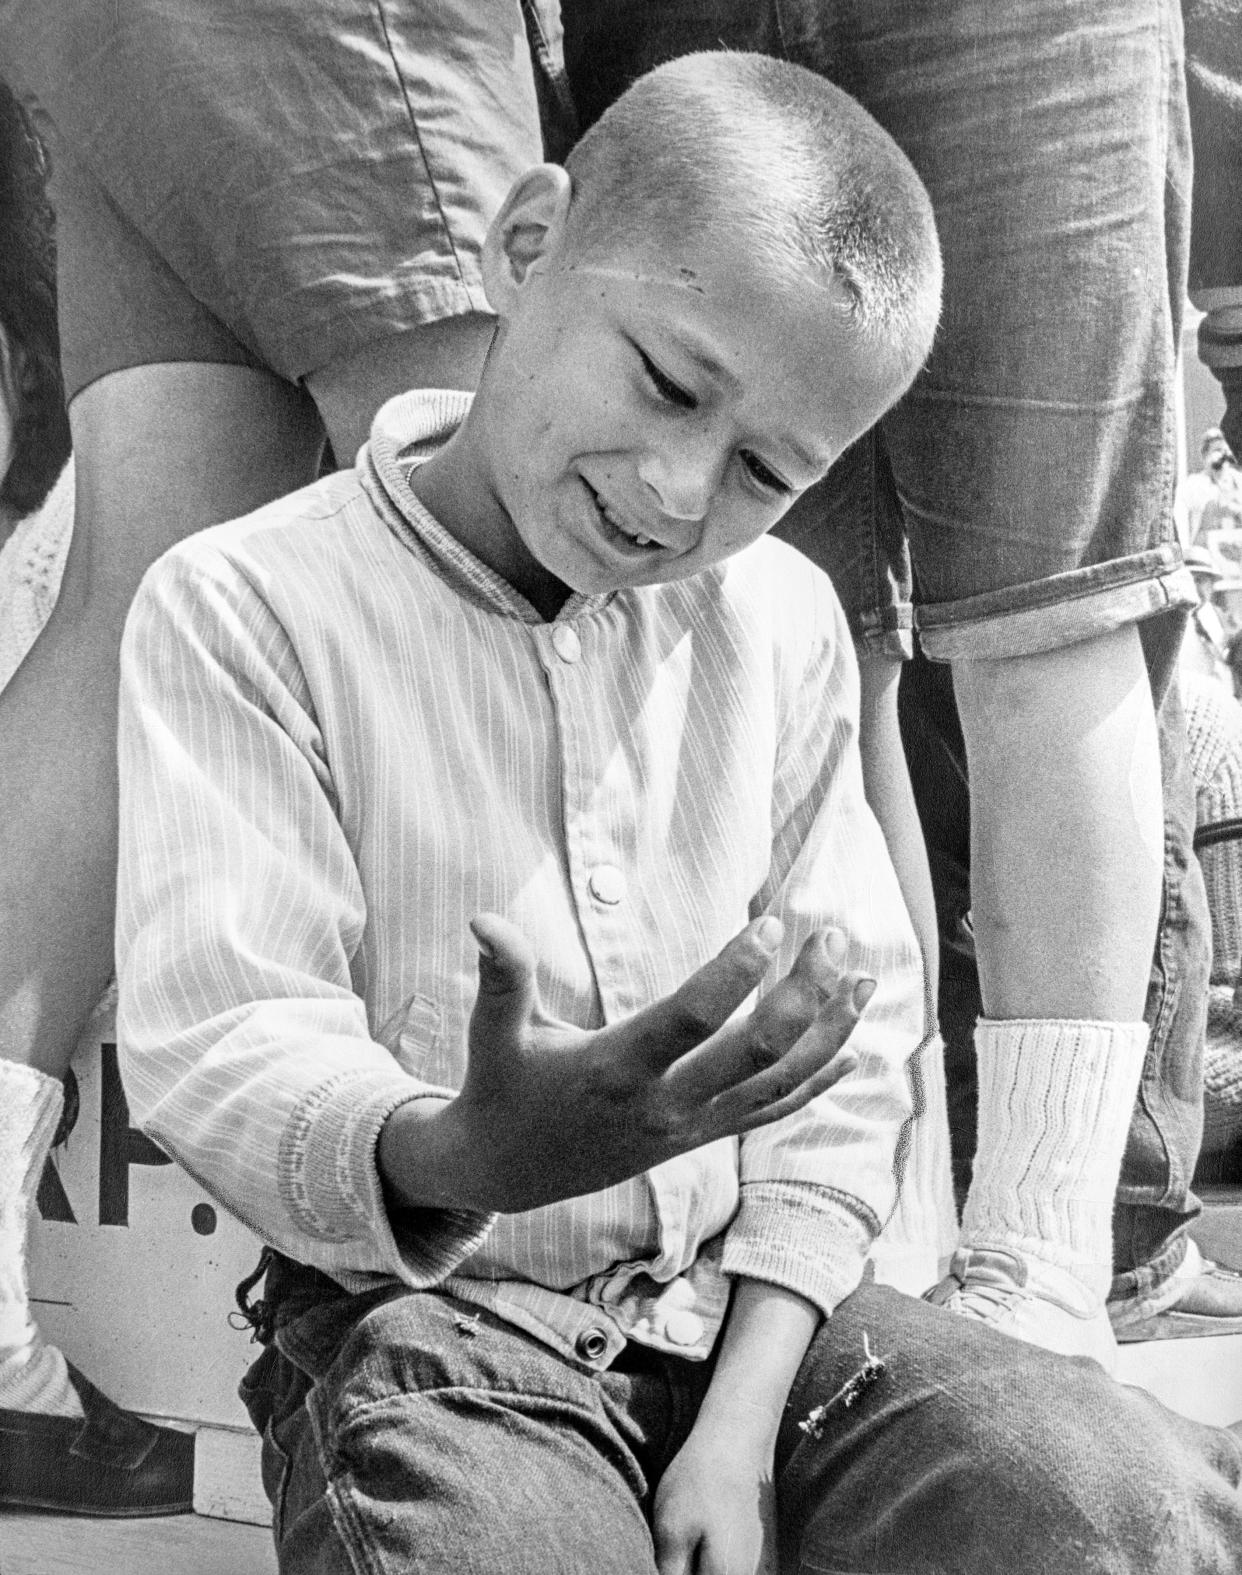 Michael Howlett, 10, examines his hand in disbelief after shaking hands with President Lyndon B. Johnson at Worcester Airport on June 10, 1964. The photo appeared in the next day's Worcester Telegram.